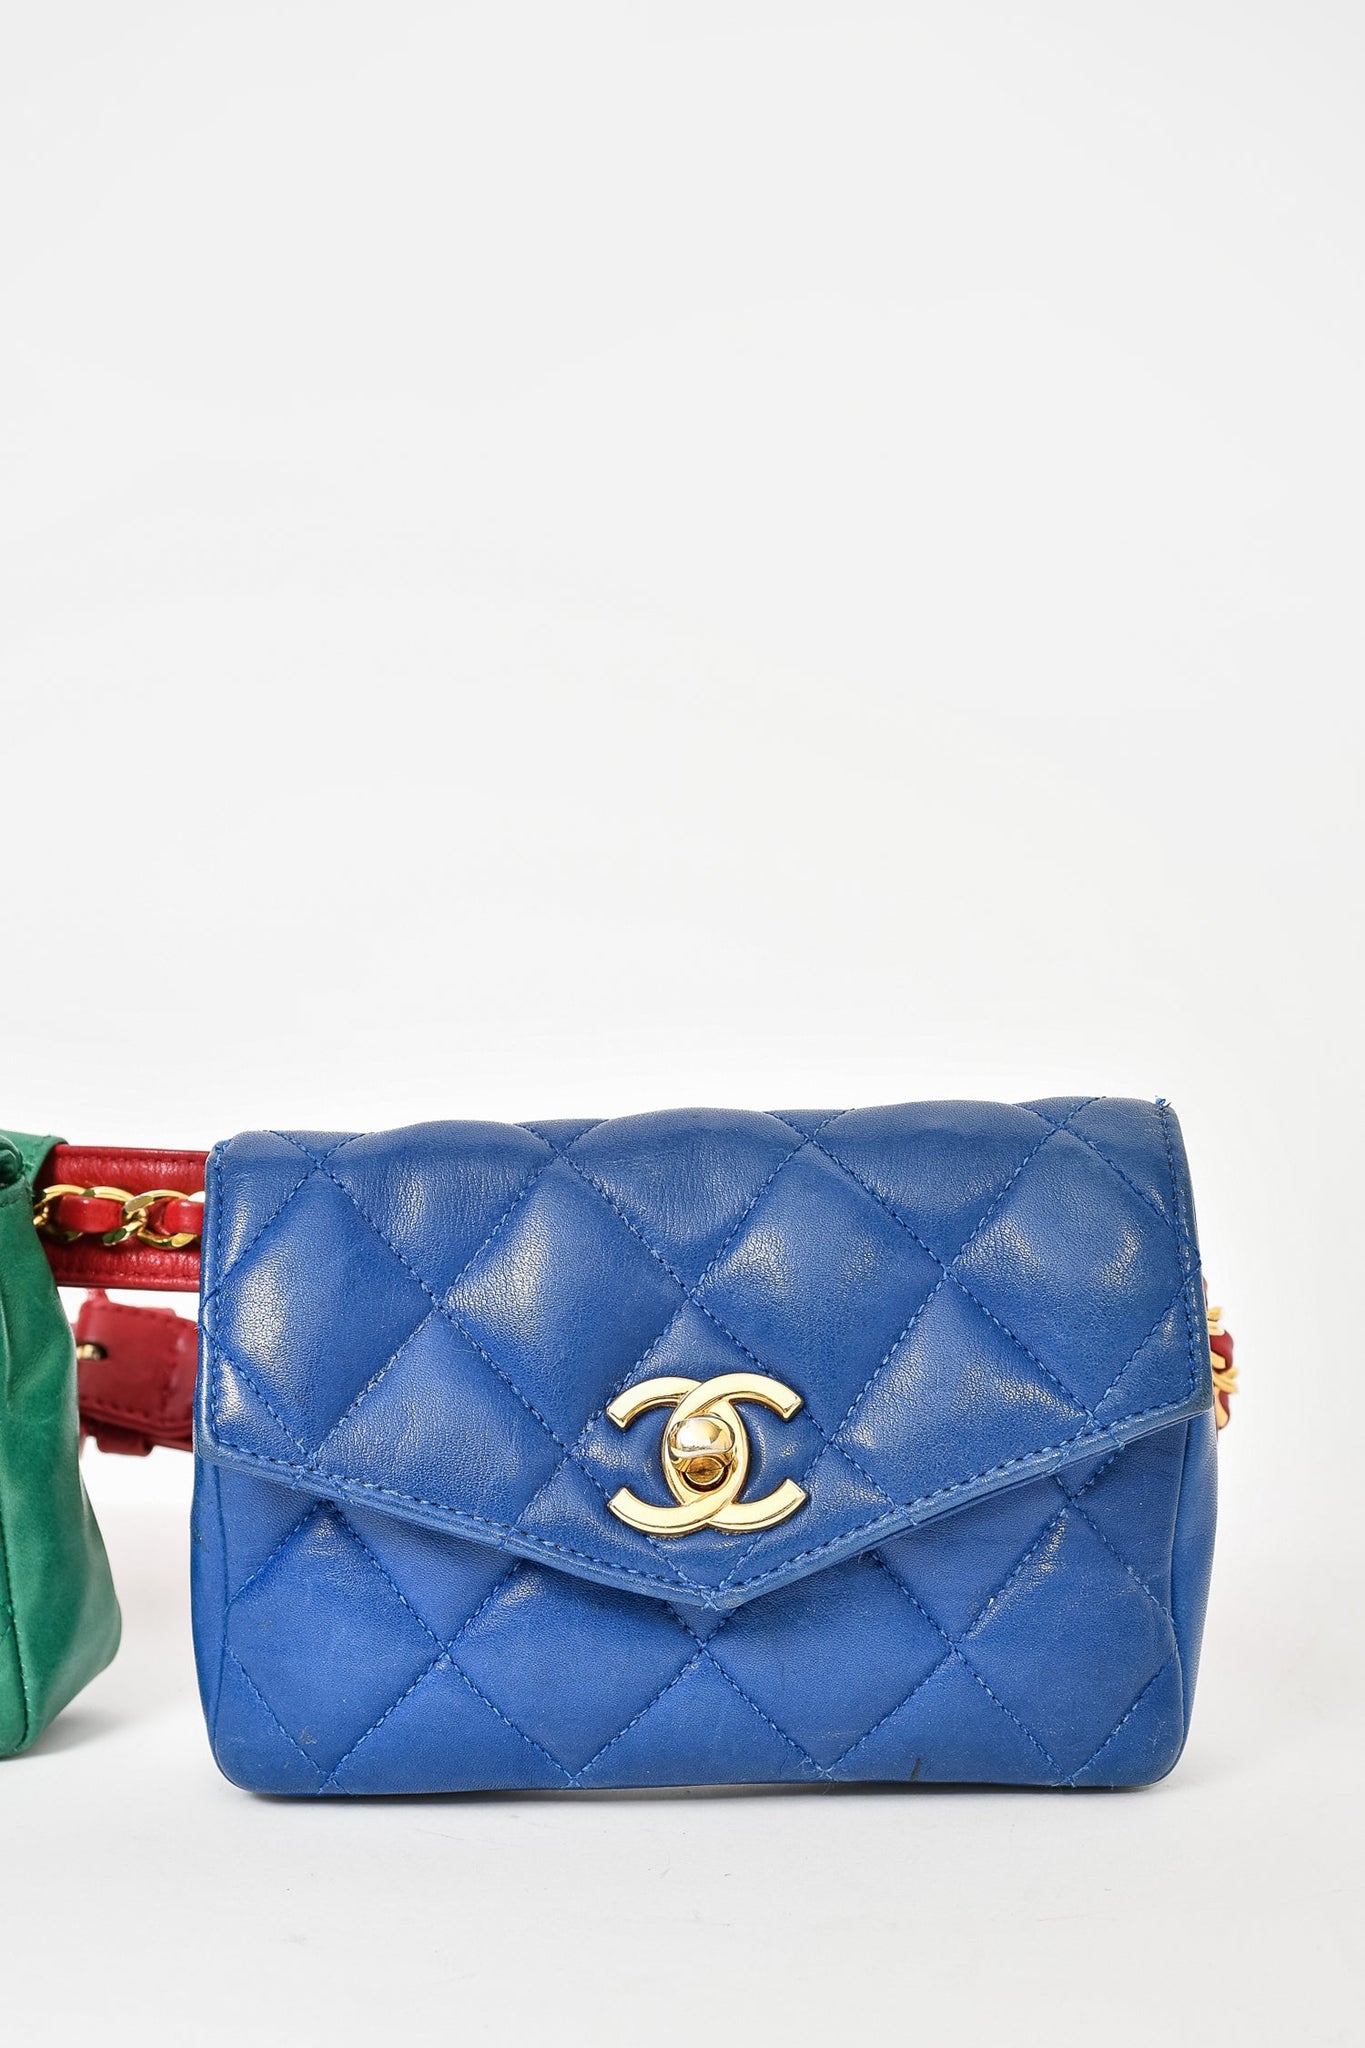 Chanel Vintage 1980's Green/Blue Leather Double Pouch Red Belt Bag